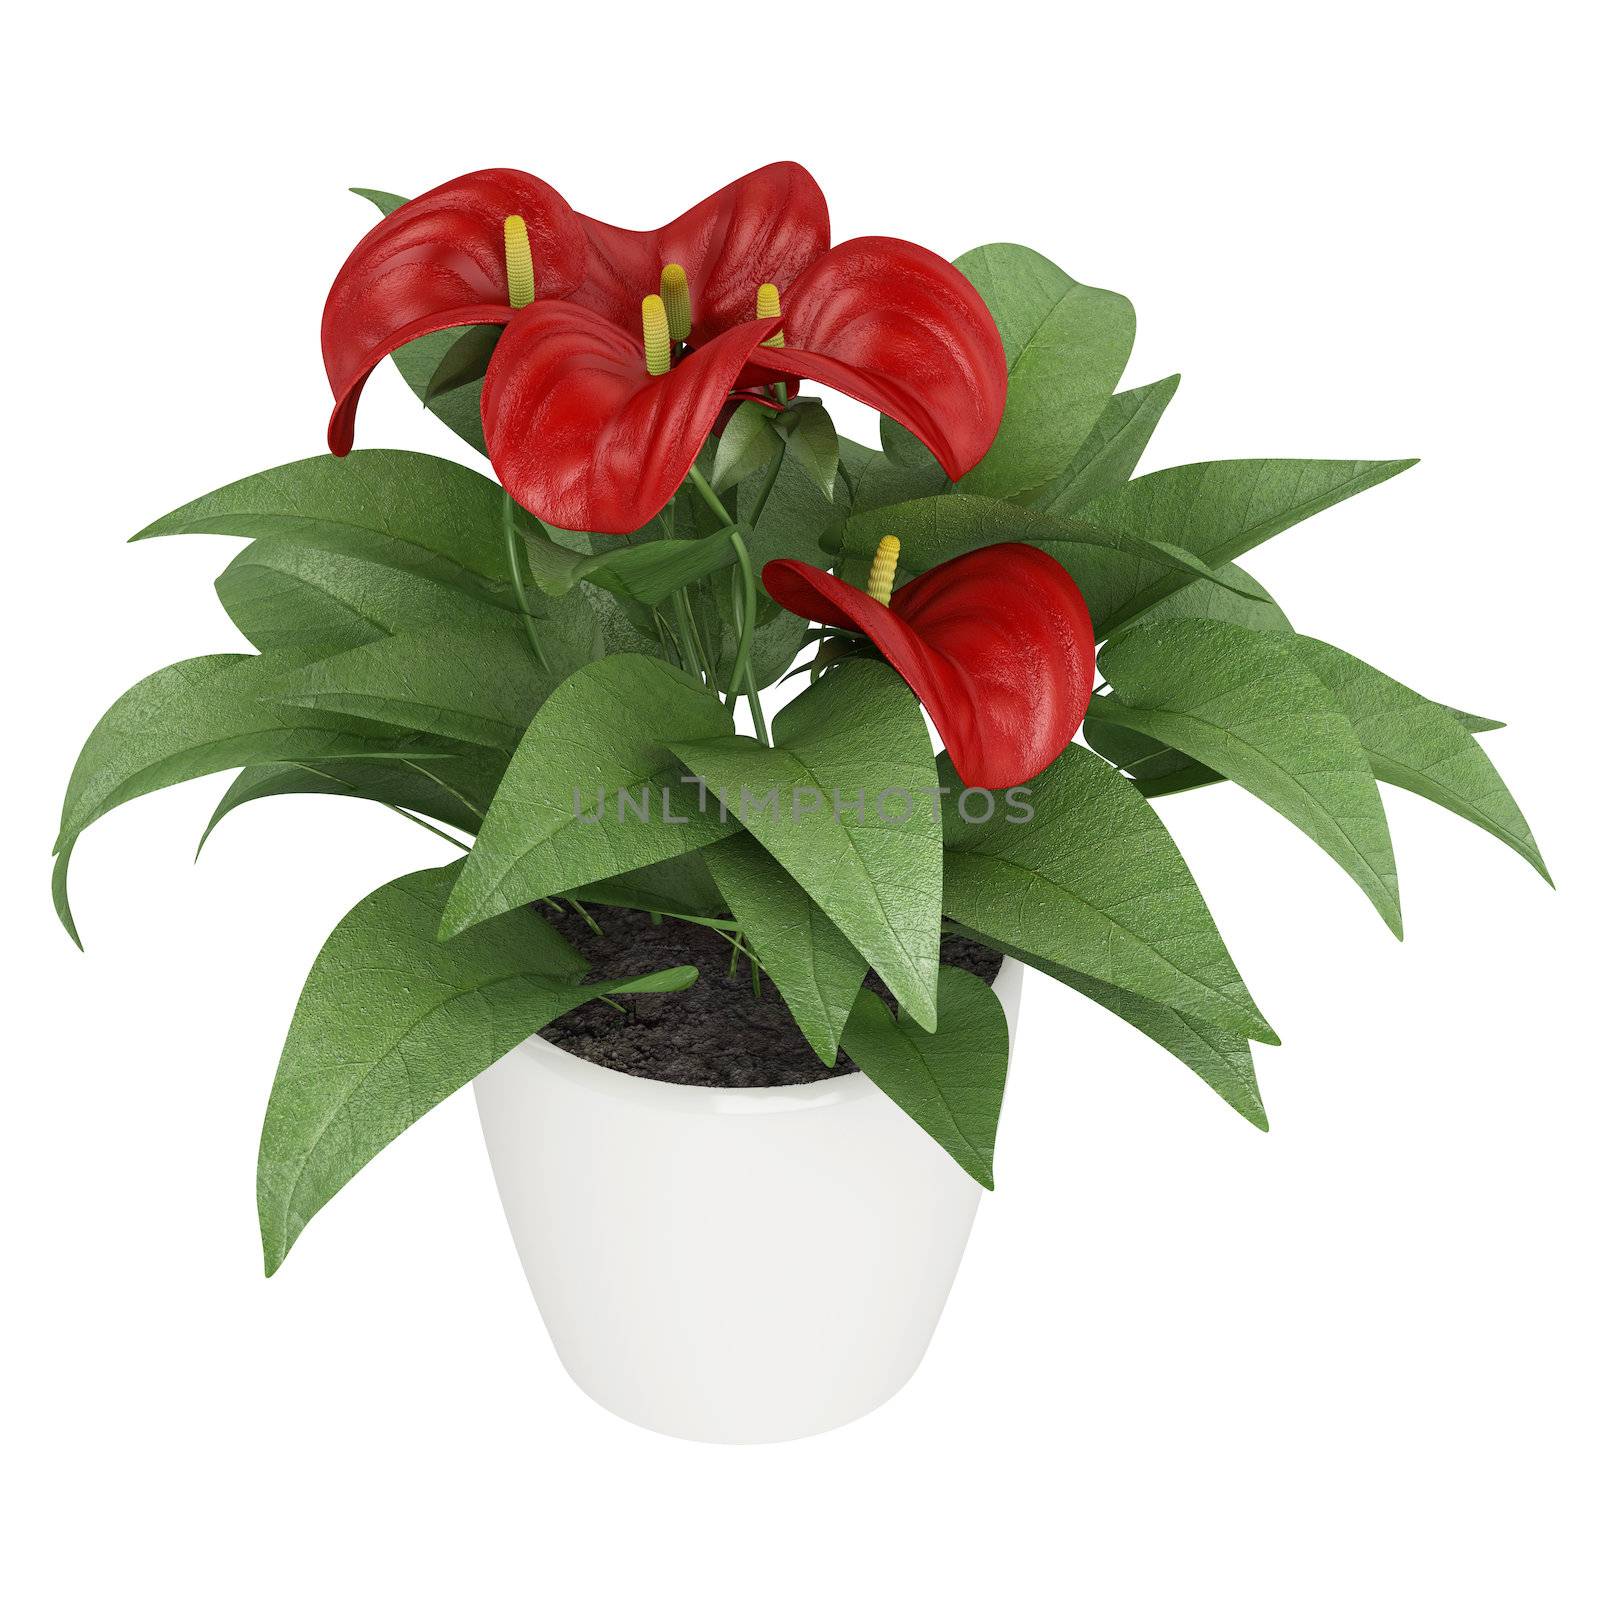 Anthurium flowers with a deep red spathe blooming on an indoor pot plant isolated on white